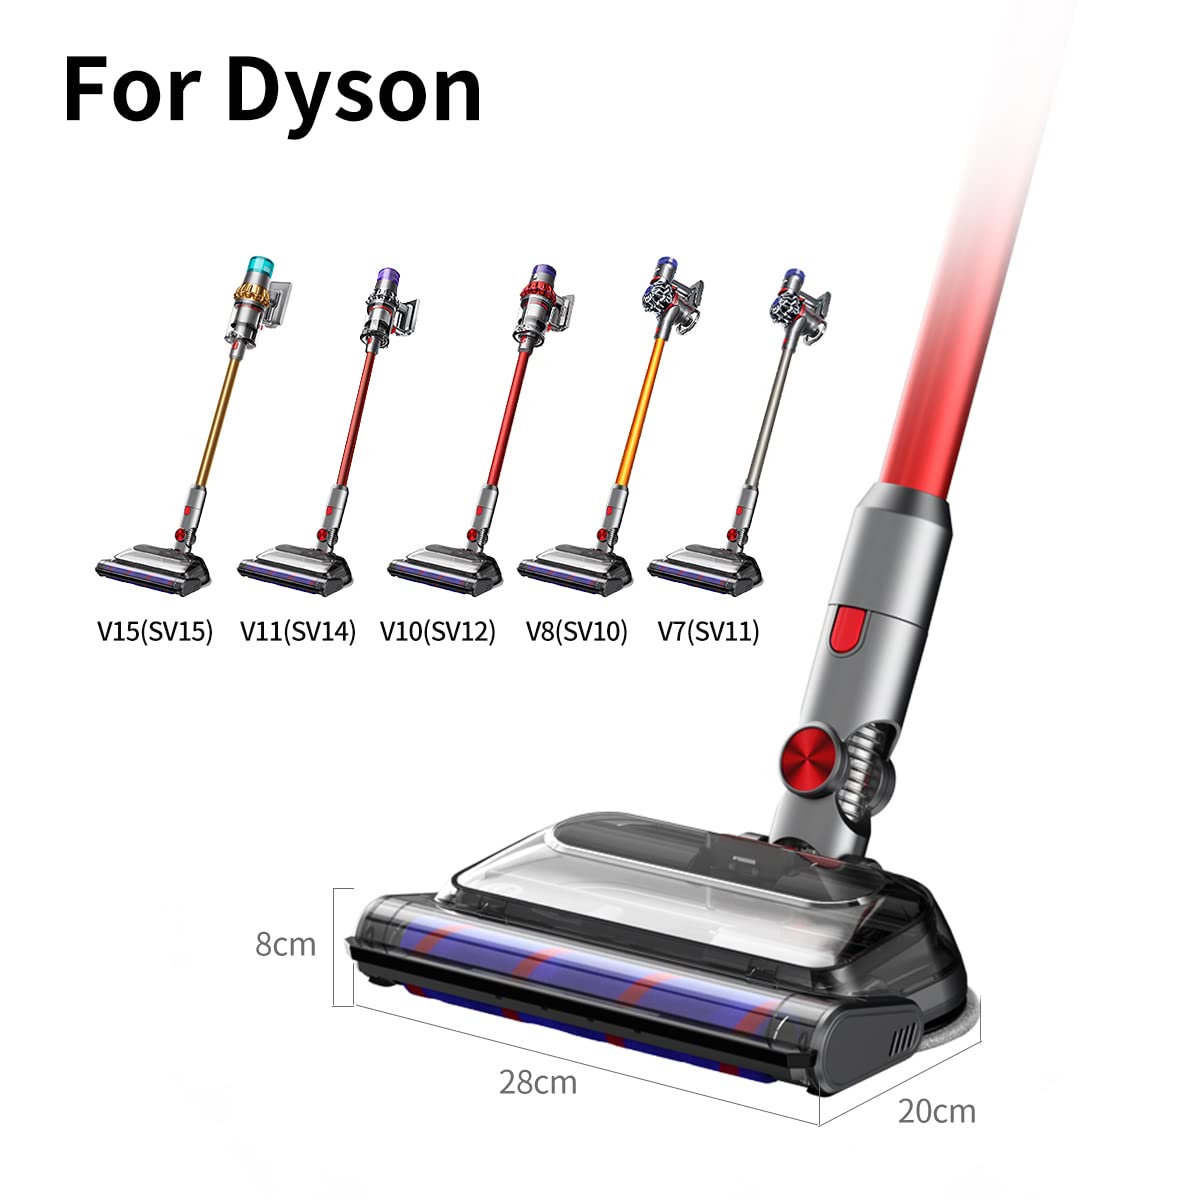 Electric mop Head for Dyson v7 v8 v10 v11 v15Vacuum Cleaner,Wet vacuum cleaner for furniture with detachable water tank and six reusable mop pads.